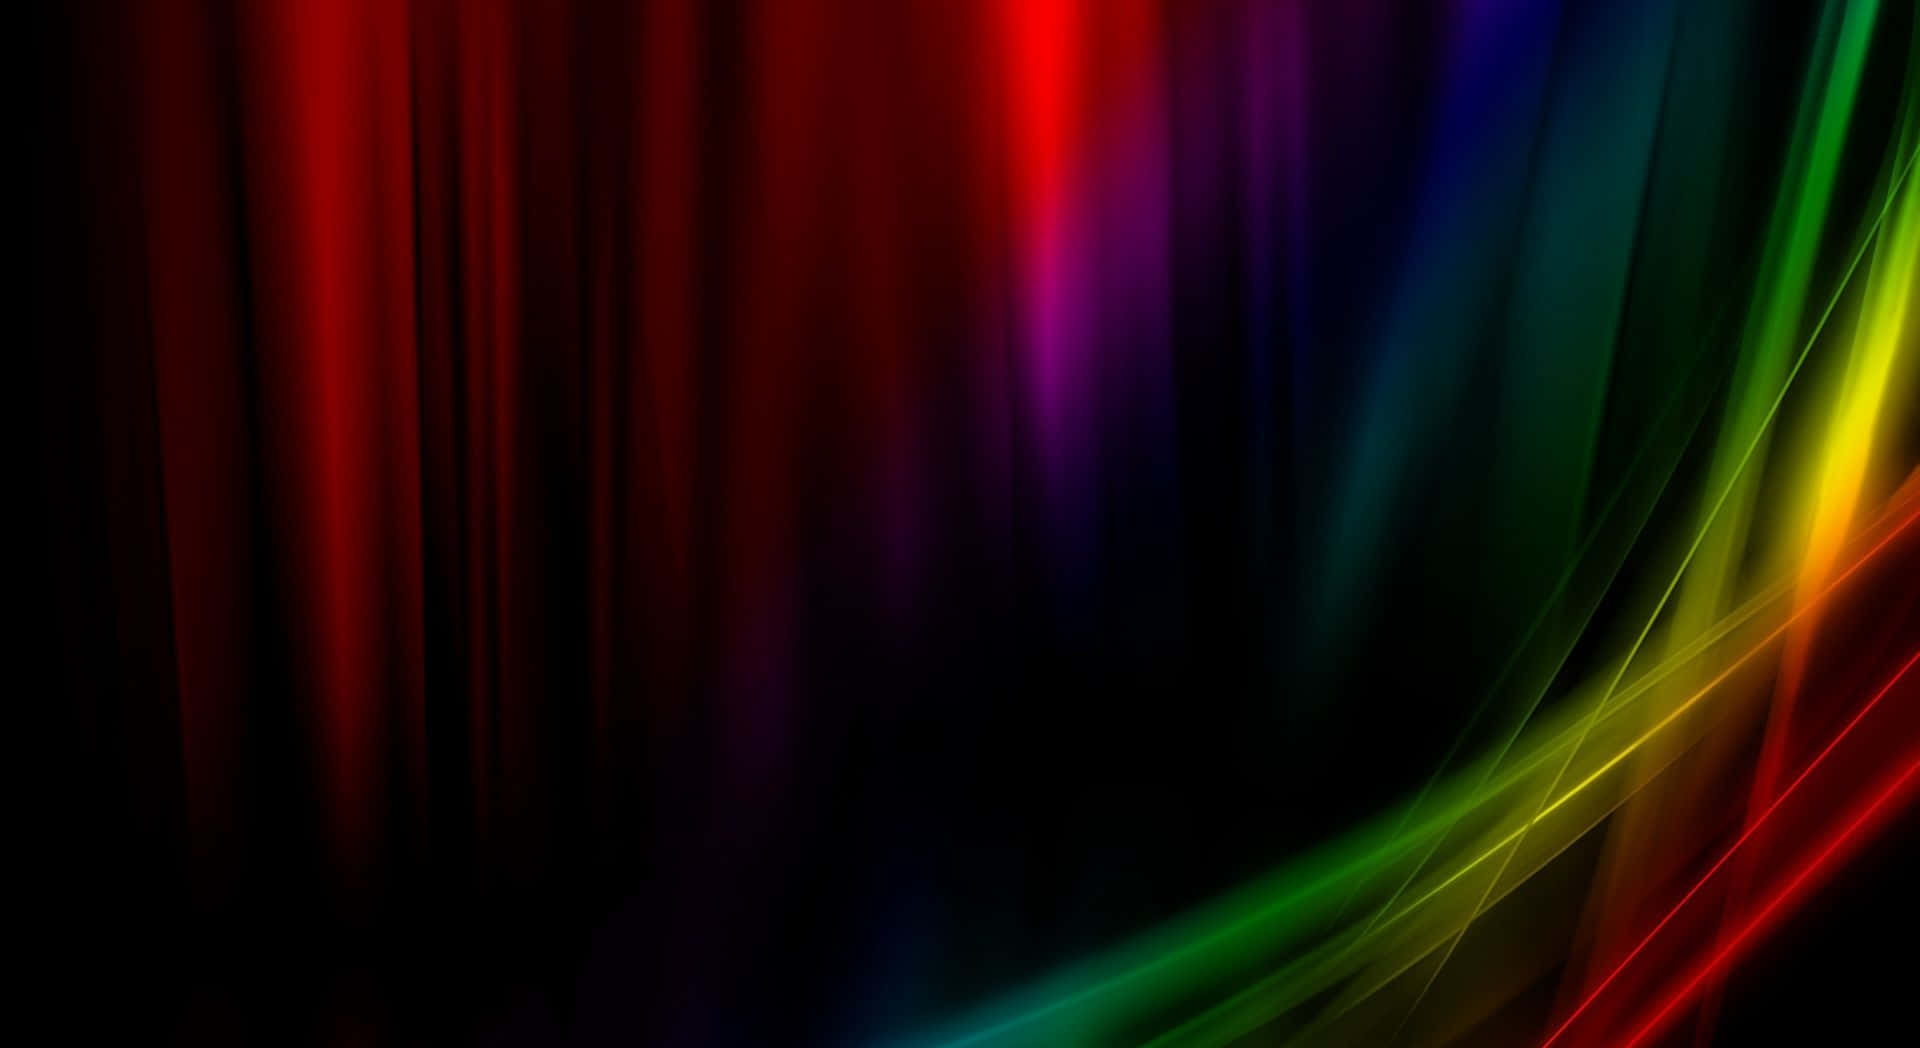 Majestic colors seen in the Black Rainbow Wallpaper